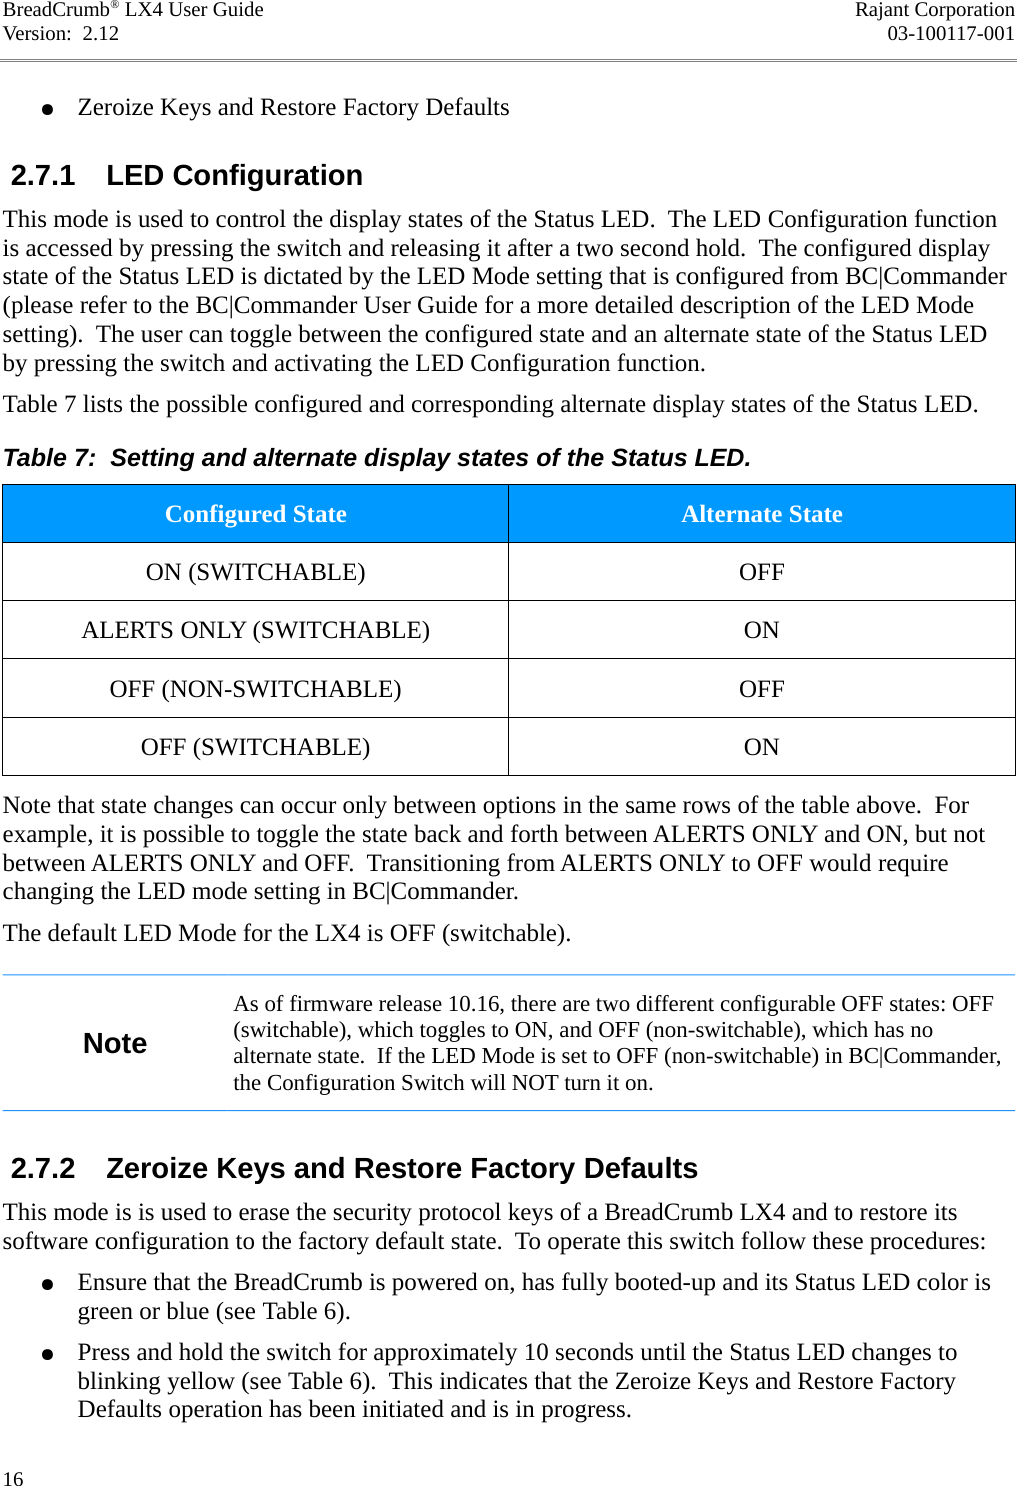 BreadCrumb® LX4 User Guide Rajant CorporationVersion:  2.12 03-100117-001●Zeroize Keys and Restore Factory Defaults 2.7.1  LED ConfigurationThis mode is used to control the display states of the Status LED.  The LED Configuration function is accessed by pressing the switch and releasing it after a two second hold.  The configured display state of the Status LED is dictated by the LED Mode setting that is configured from BC|Commander (please refer to the BC|Commander User Guide for a more detailed description of the LED Mode setting).  The user can toggle between the configured state and an alternate state of the Status LED by pressing the switch and activating the LED Configuration function.Table 7 lists the possible configured and corresponding alternate display states of the Status LED.Table 7:  Setting and alternate display states of the Status LED.Configured State Alternate StateON (SWITCHABLE) OFFALERTS ONLY (SWITCHABLE) ONOFF (NON-SWITCHABLE) OFFOFF (SWITCHABLE) ONNote that state changes can occur only between options in the same rows of the table above.  For example, it is possible to toggle the state back and forth between ALERTS ONLY and ON, but not between ALERTS ONLY and OFF.  Transitioning from ALERTS ONLY to OFF would require changing the LED mode setting in BC|Commander.The default LED Mode for the LX4 is OFF (switchable).NoteAs of firmware release 10.16, there are two different configurable OFF states: OFF (switchable), which toggles to ON, and OFF (non-switchable), which has no alternate state.  If the LED Mode is set to OFF (non-switchable) in BC|Commander, the Configuration Switch will NOT turn it on. 2.7.2  Zeroize Keys and Restore Factory DefaultsThis mode is is used to erase the security protocol keys of a BreadCrumb LX4 and to restore its software configuration to the factory default state.  To operate this switch follow these procedures:●Ensure that the BreadCrumb is powered on, has fully booted-up and its Status LED color is green or blue (see Table 6).●Press and hold the switch for approximately 10 seconds until the Status LED changes to blinking yellow (see Table 6).  This indicates that the Zeroize Keys and Restore Factory Defaults operation has been initiated and is in progress.16